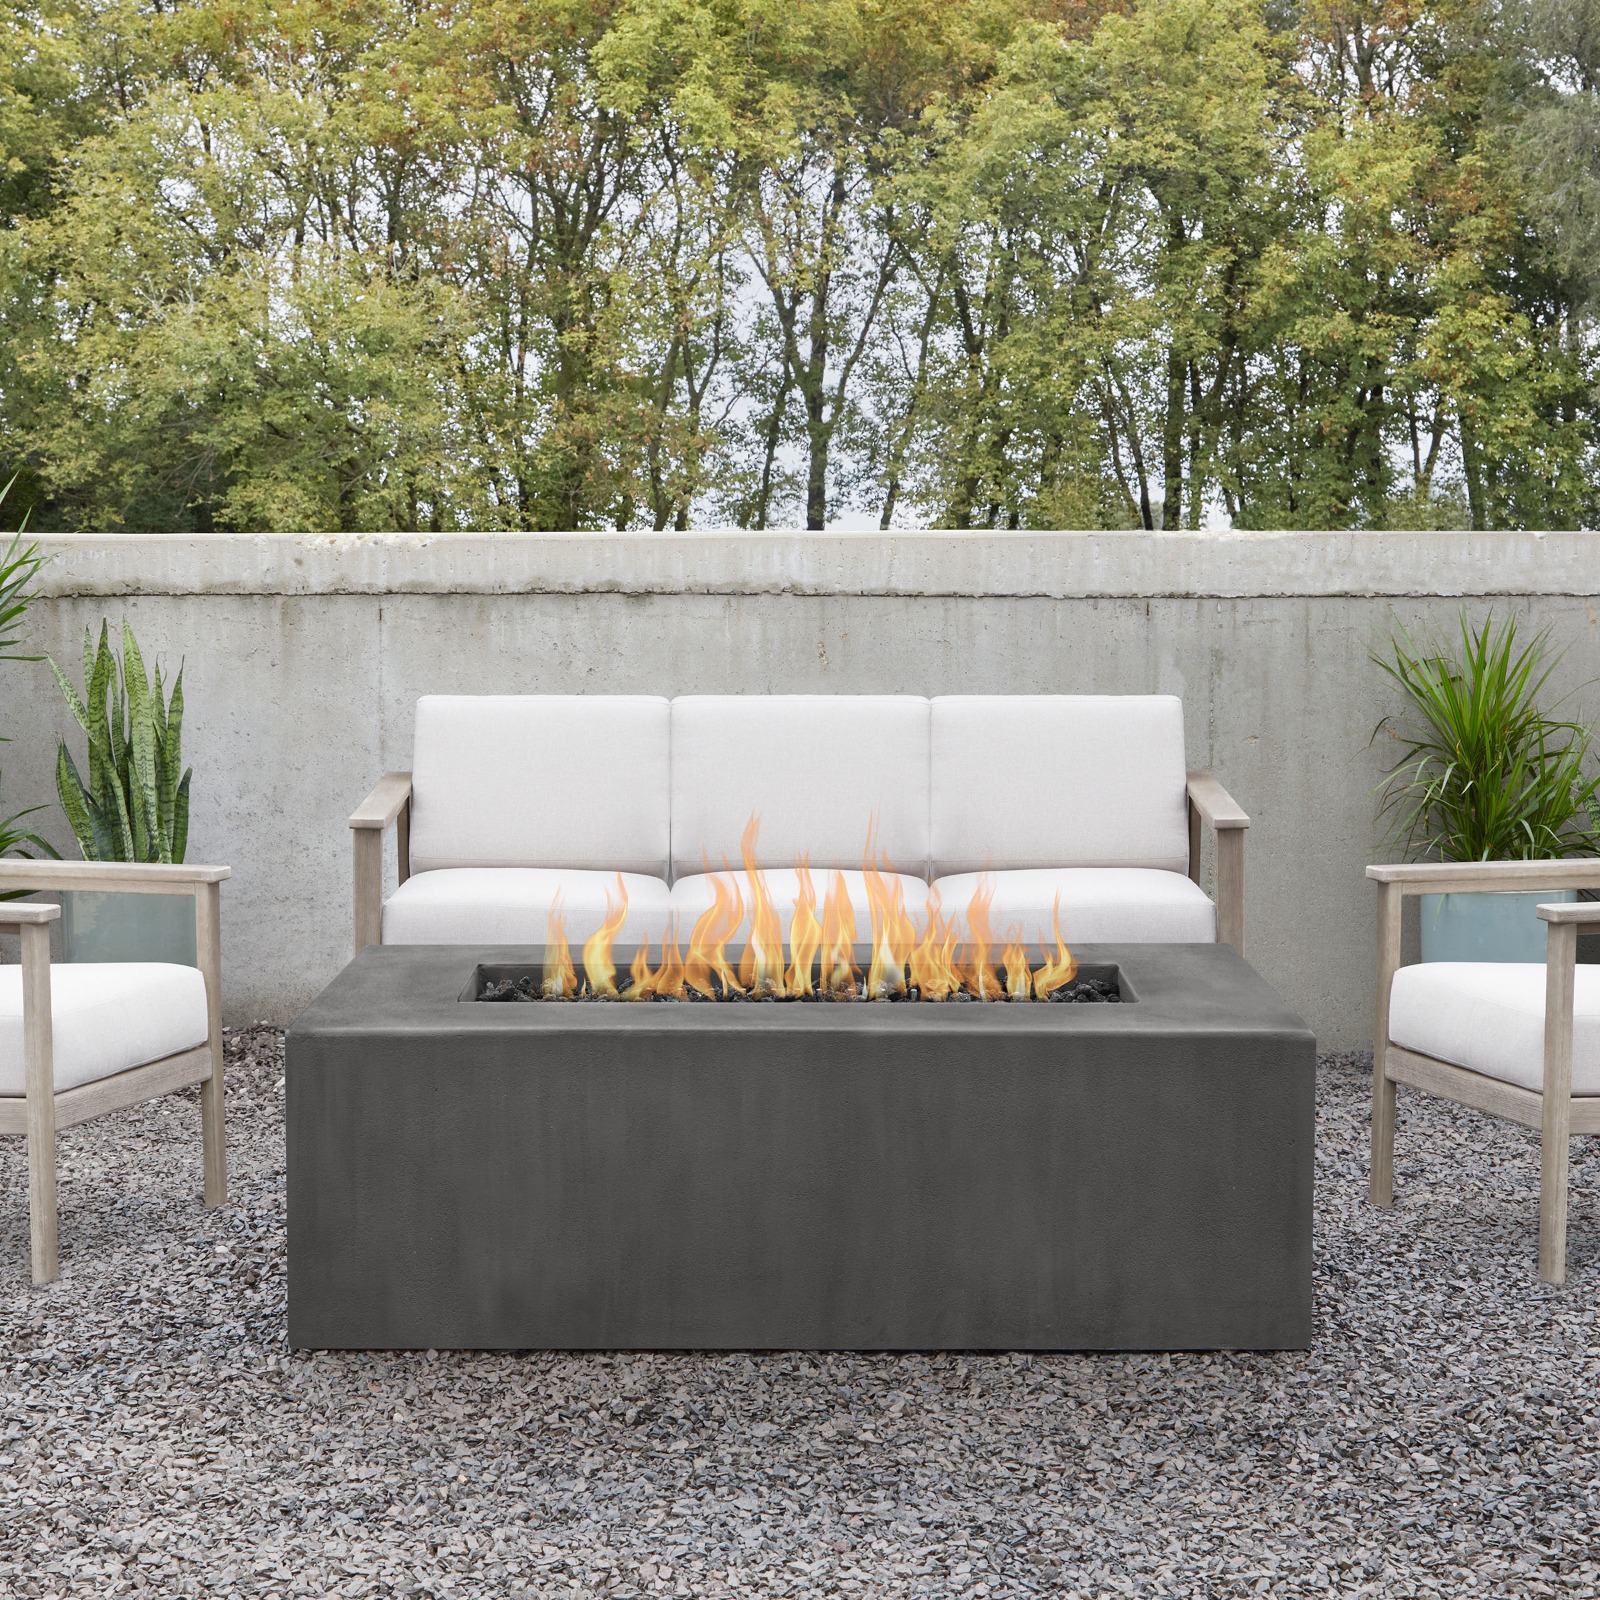 Estes Rectangle GFRC Outdoor Natural Gas or Propane Fire Pit Fireplace Fire Table for Backyard or Patio